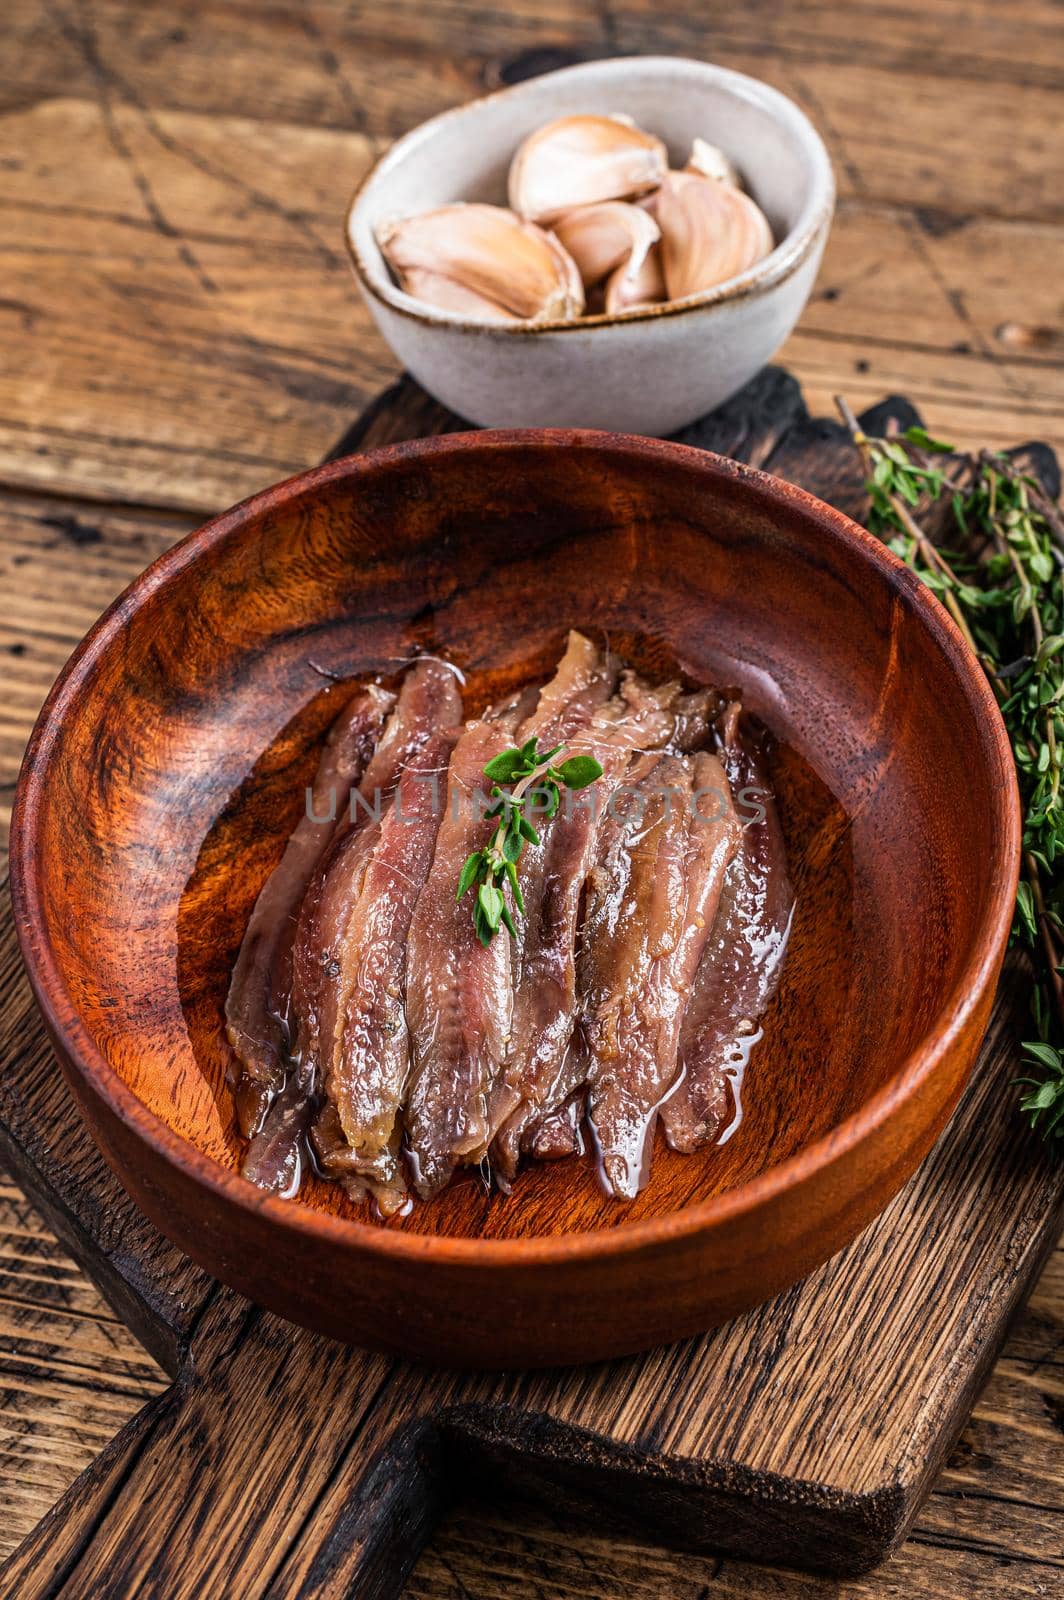 Canned Anchovies fish fillet in a wooden bowl. wooden background. Top view by Composter